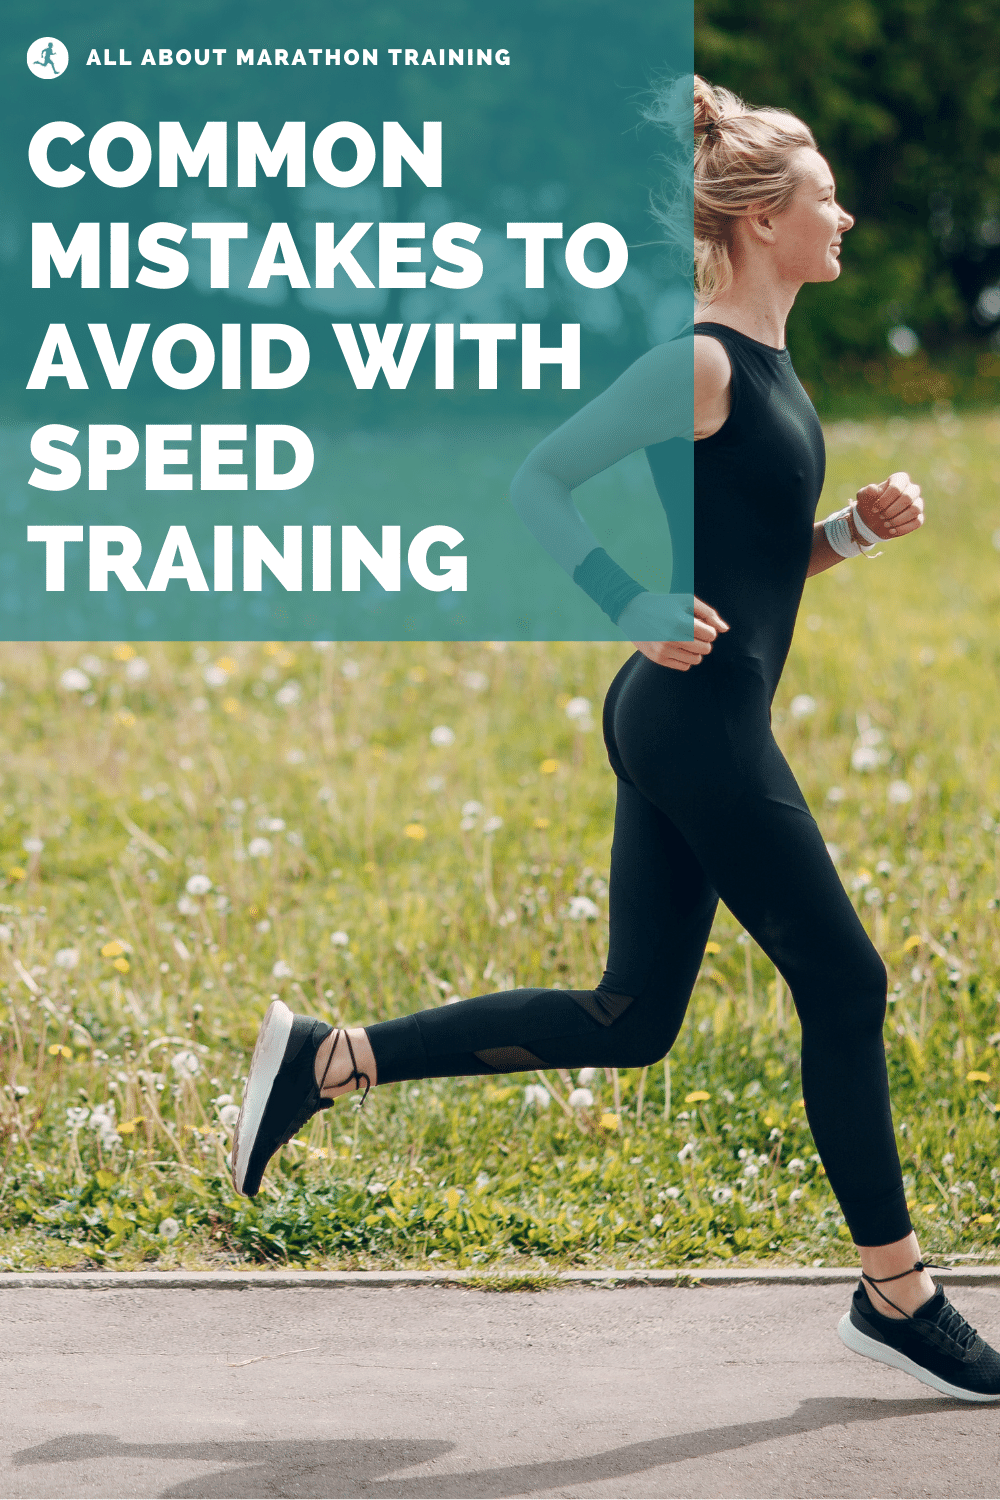 Training Distance Runners for Endurance and Speed